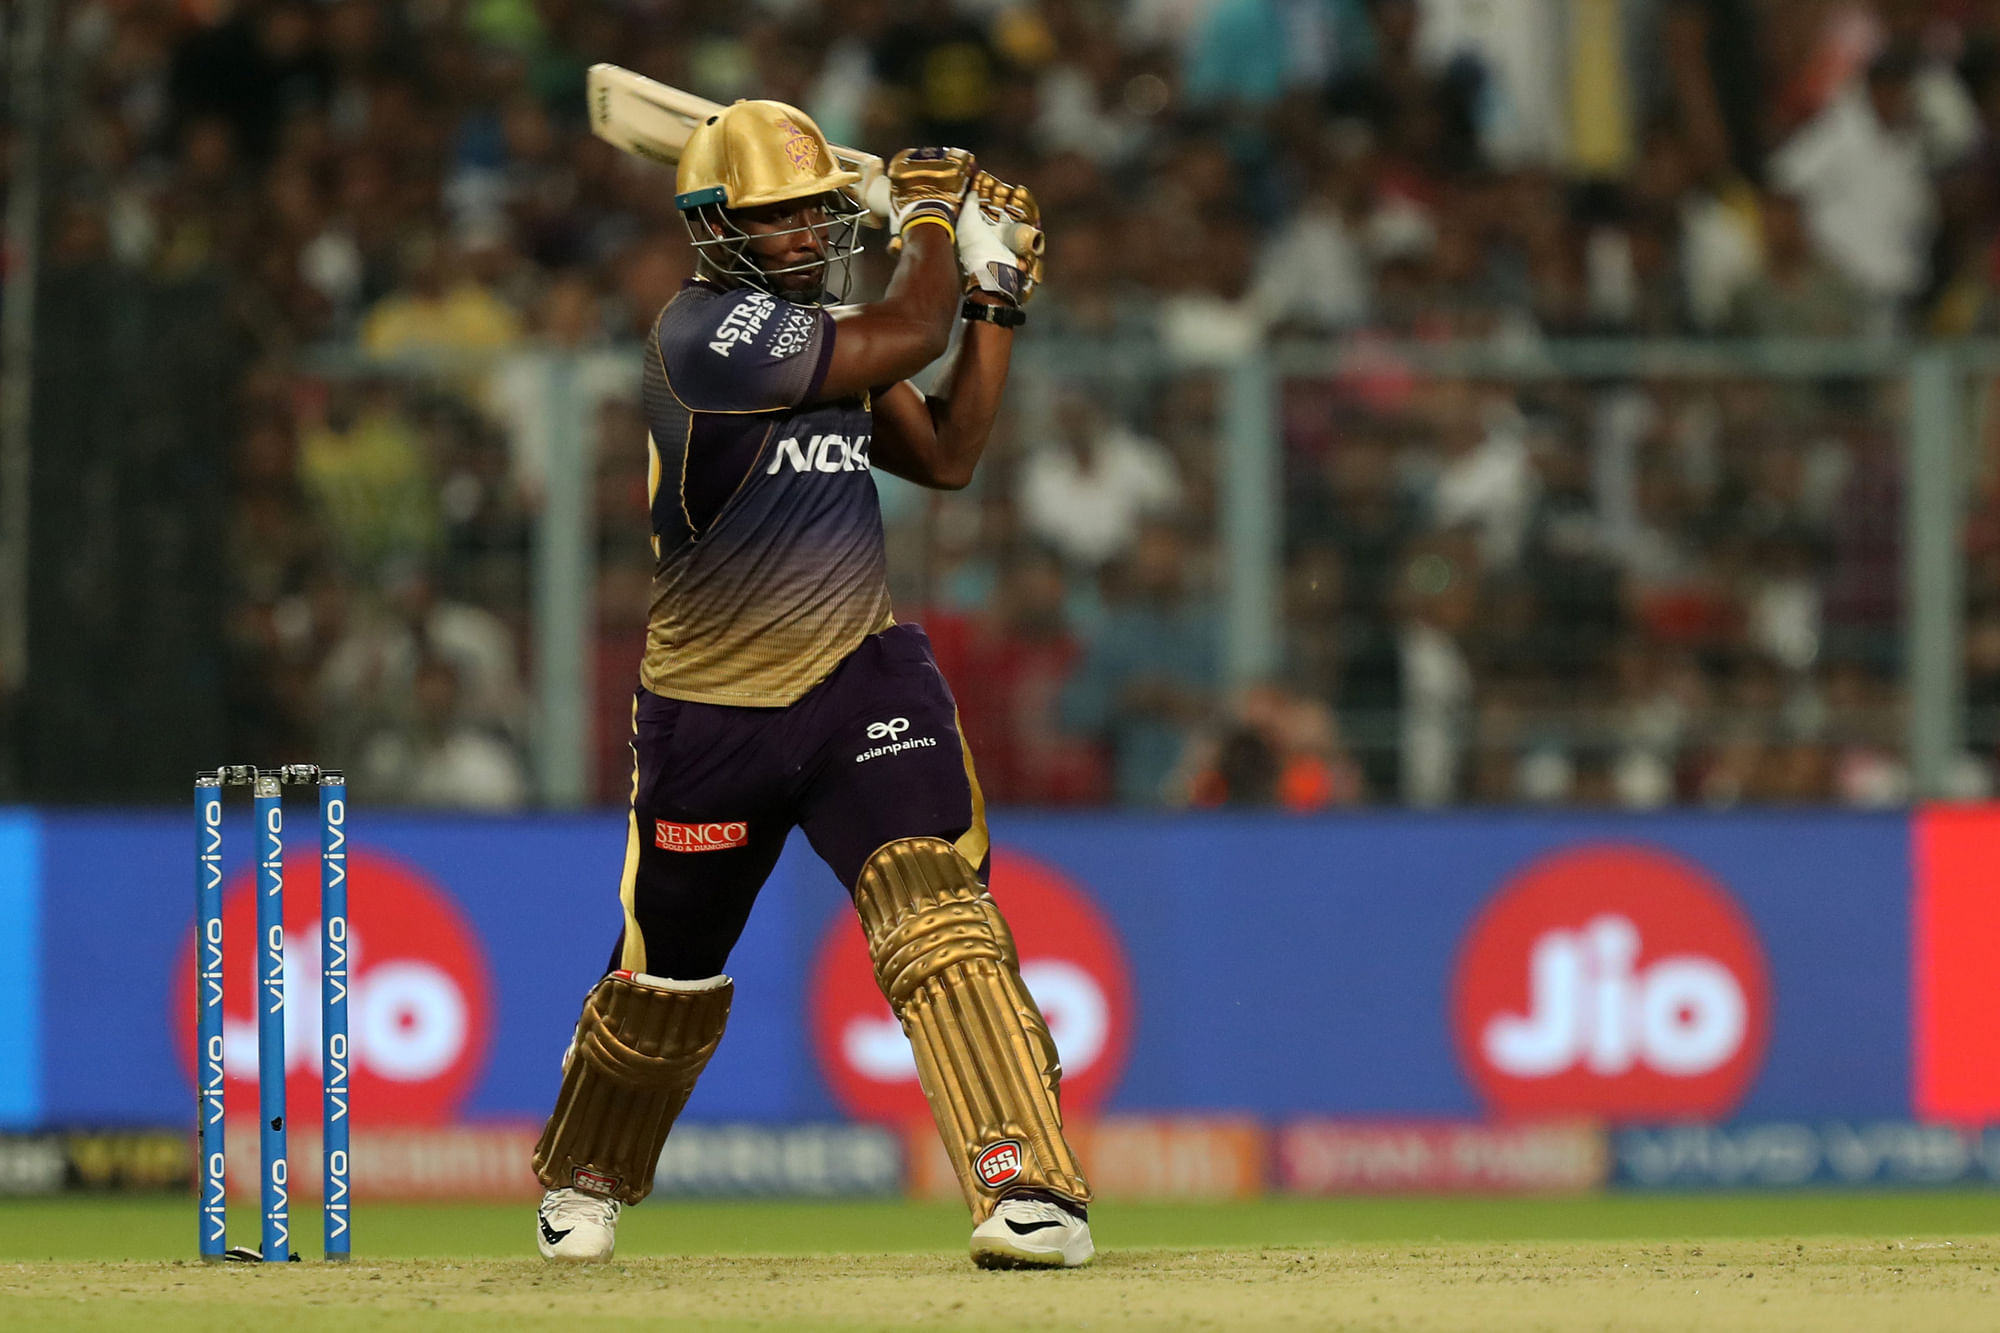 Russell scored 48 off 13 balls to win it for KKR.